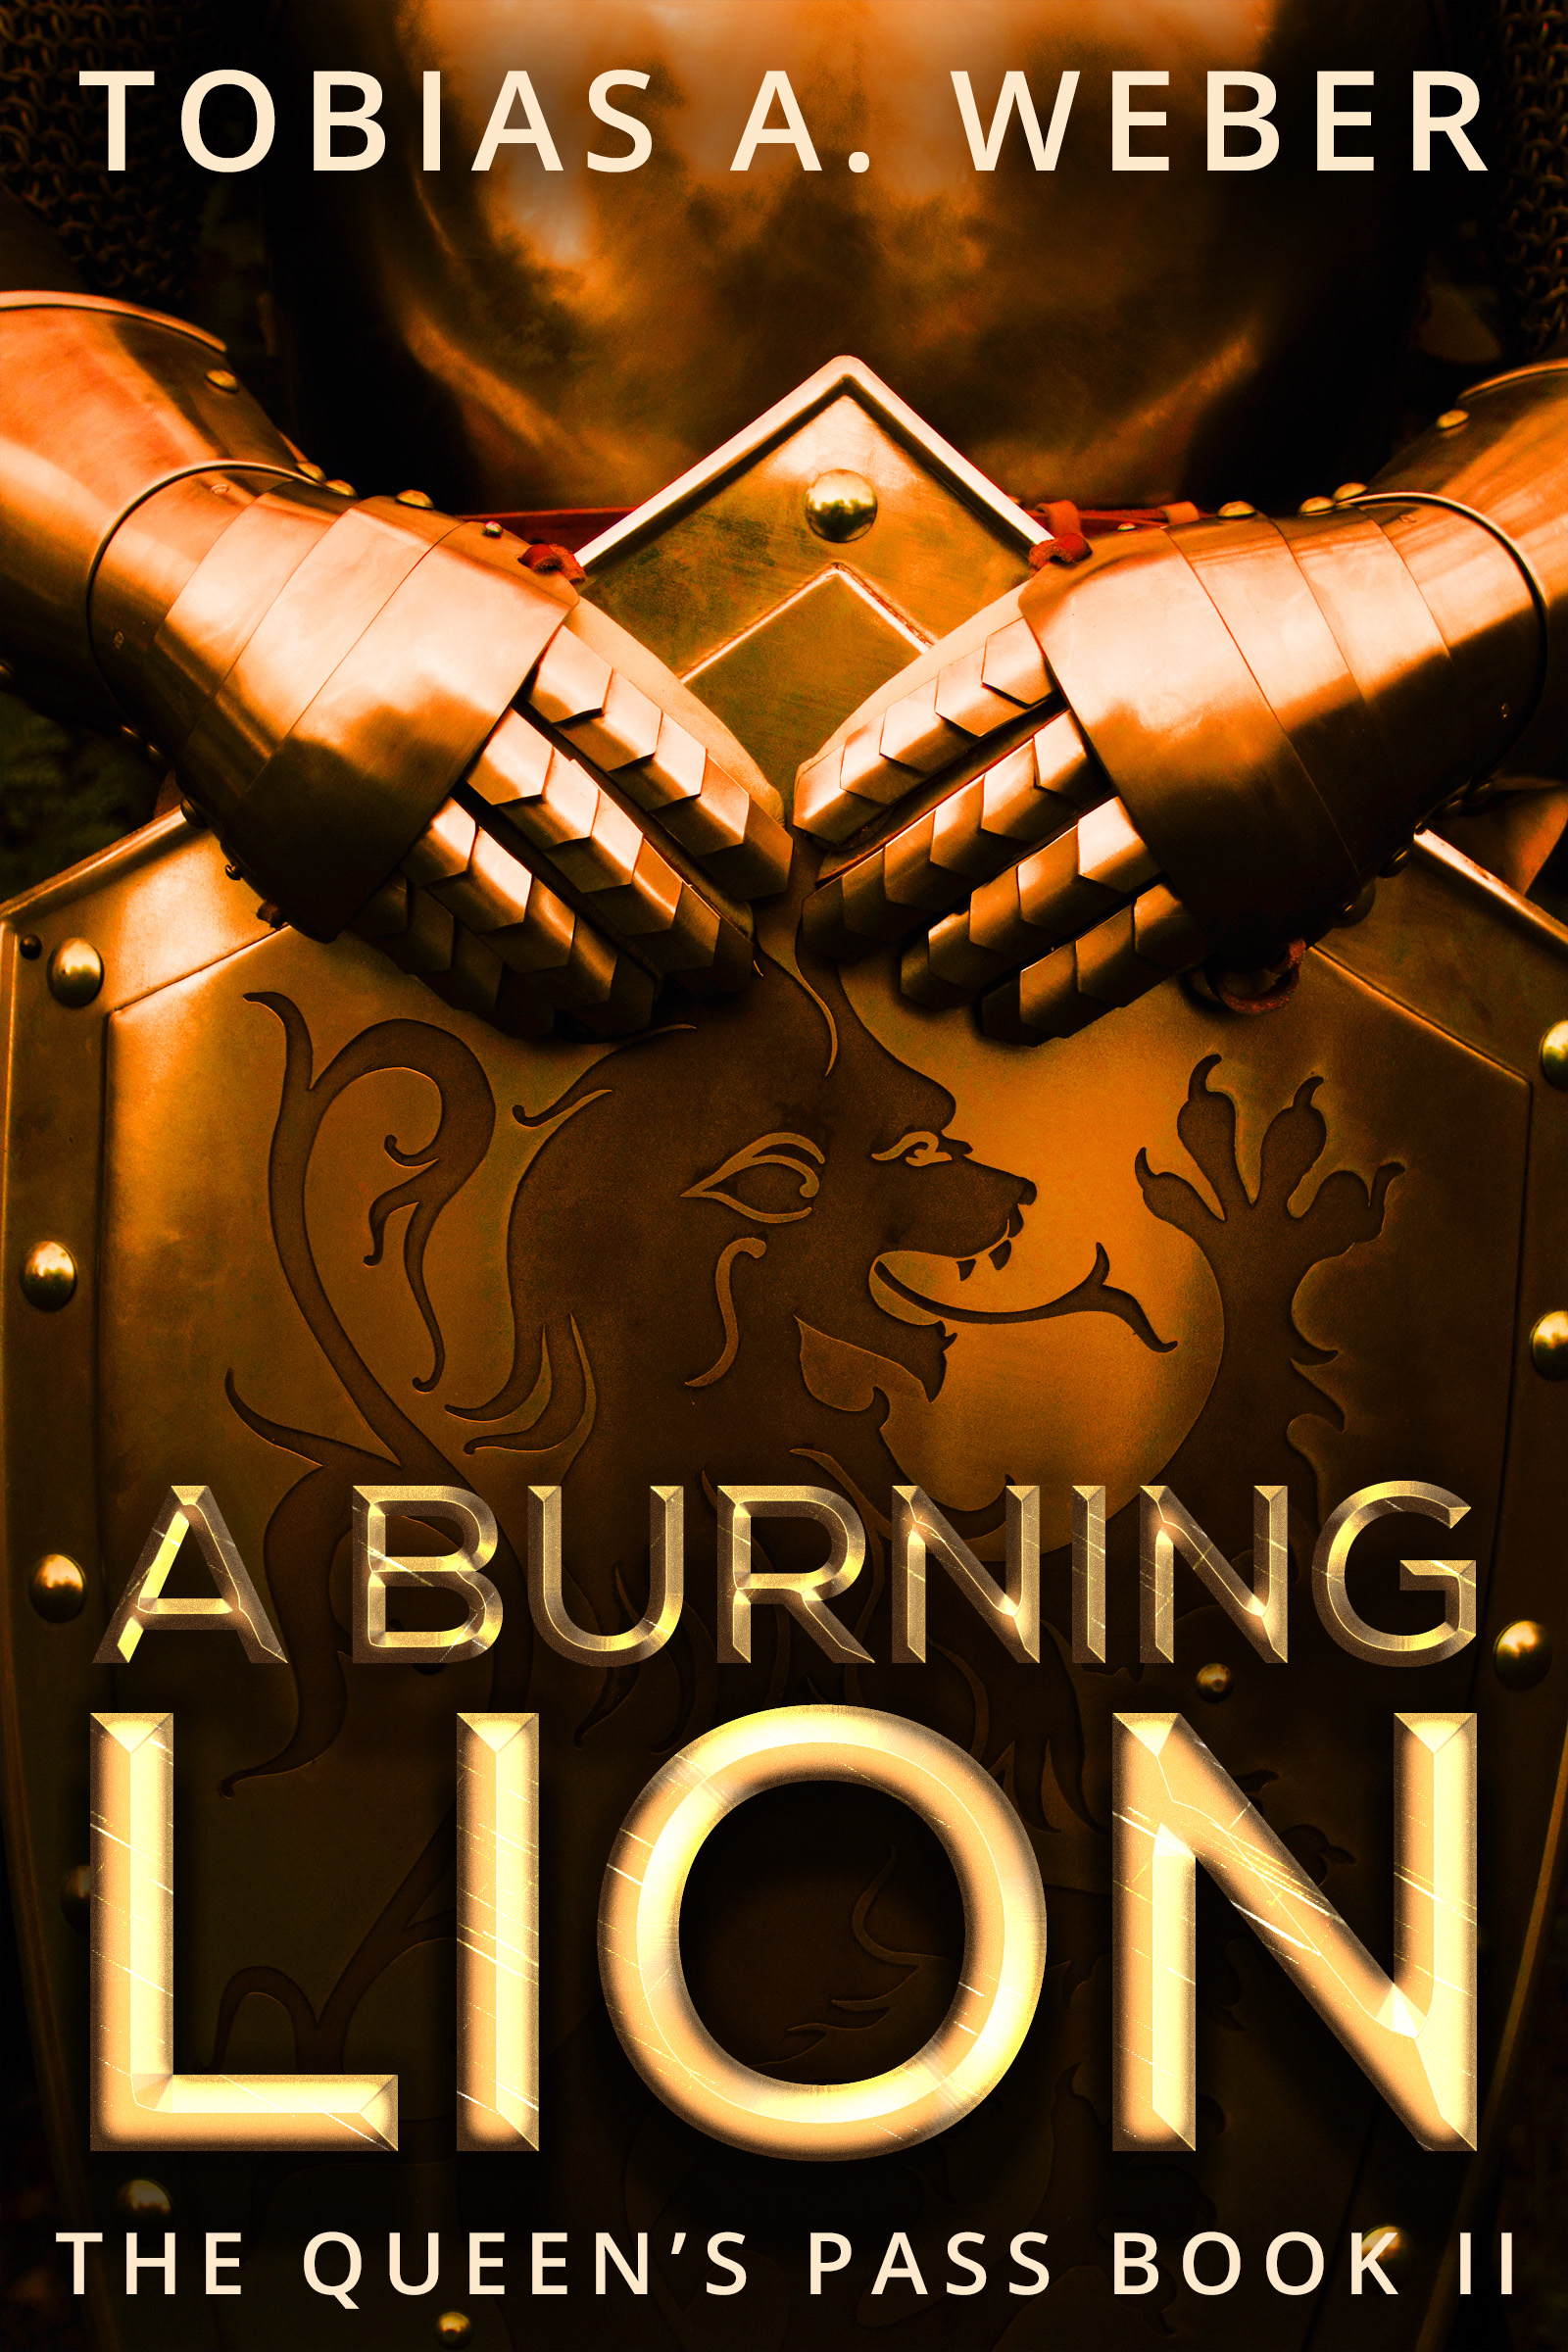 FREE: A Burning Lion by Tobias A. Weber